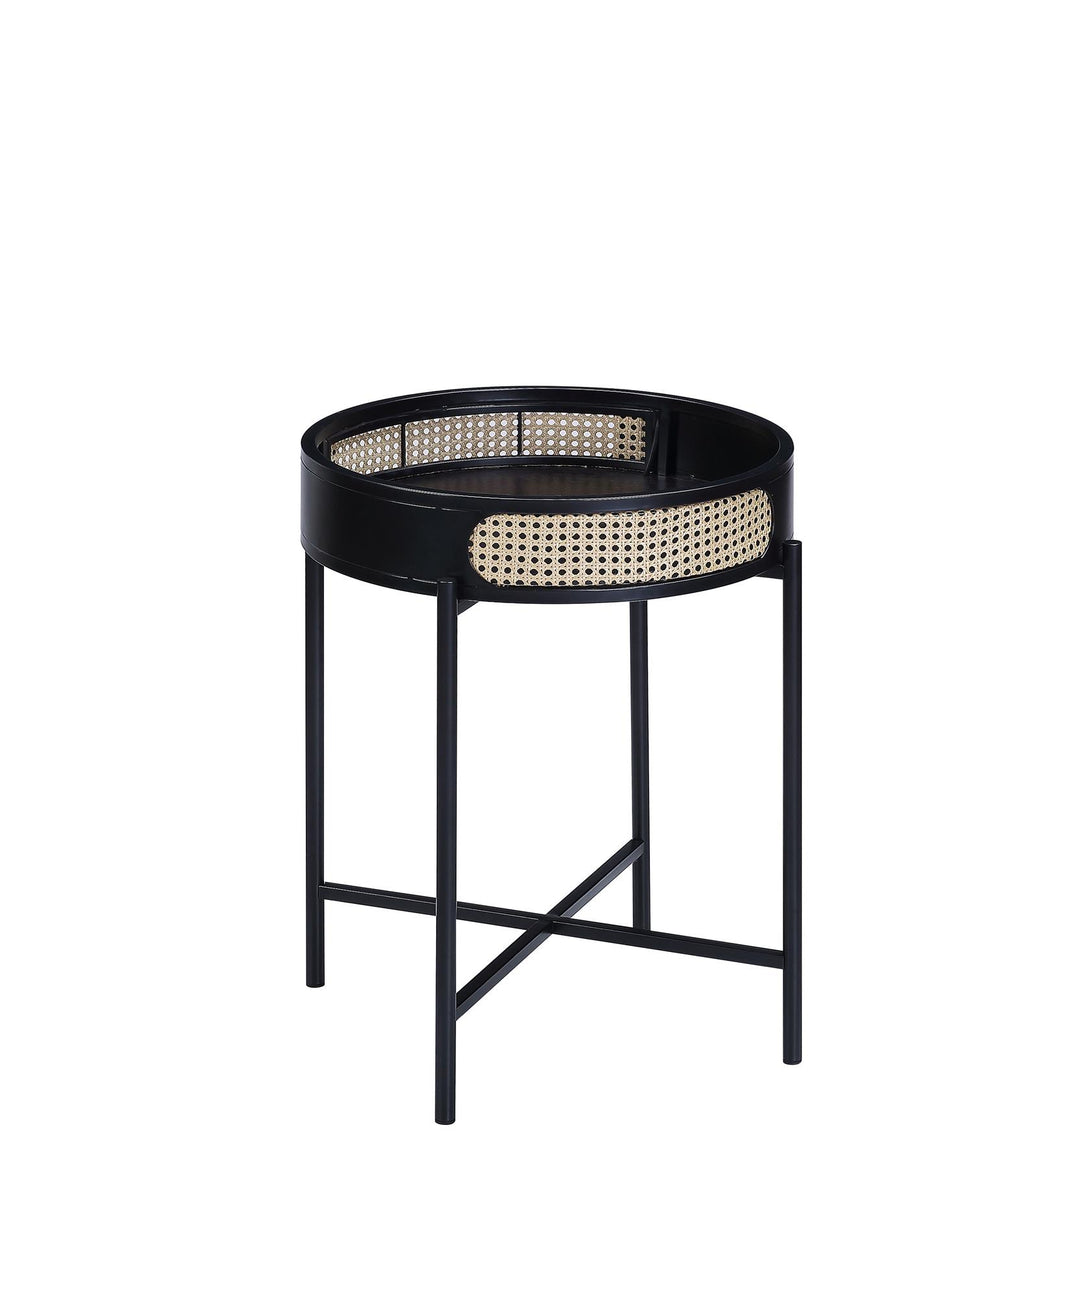 round end table for bedroom - Black